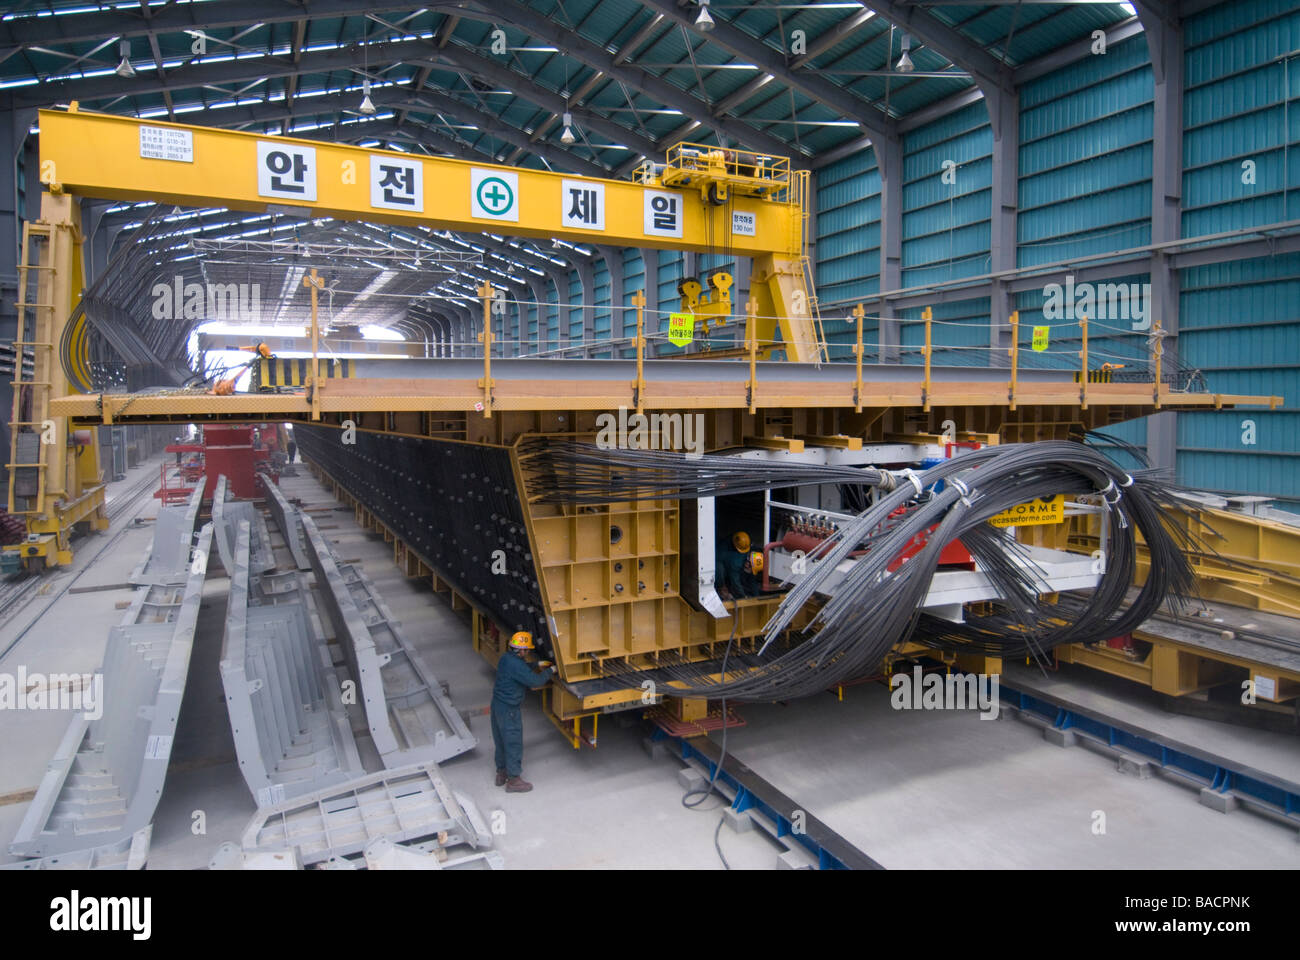 Precasting area for prestressed concrete full length box girder viaduct approach spans to Incheon Bridge in Seoul South Korea Stock Photo